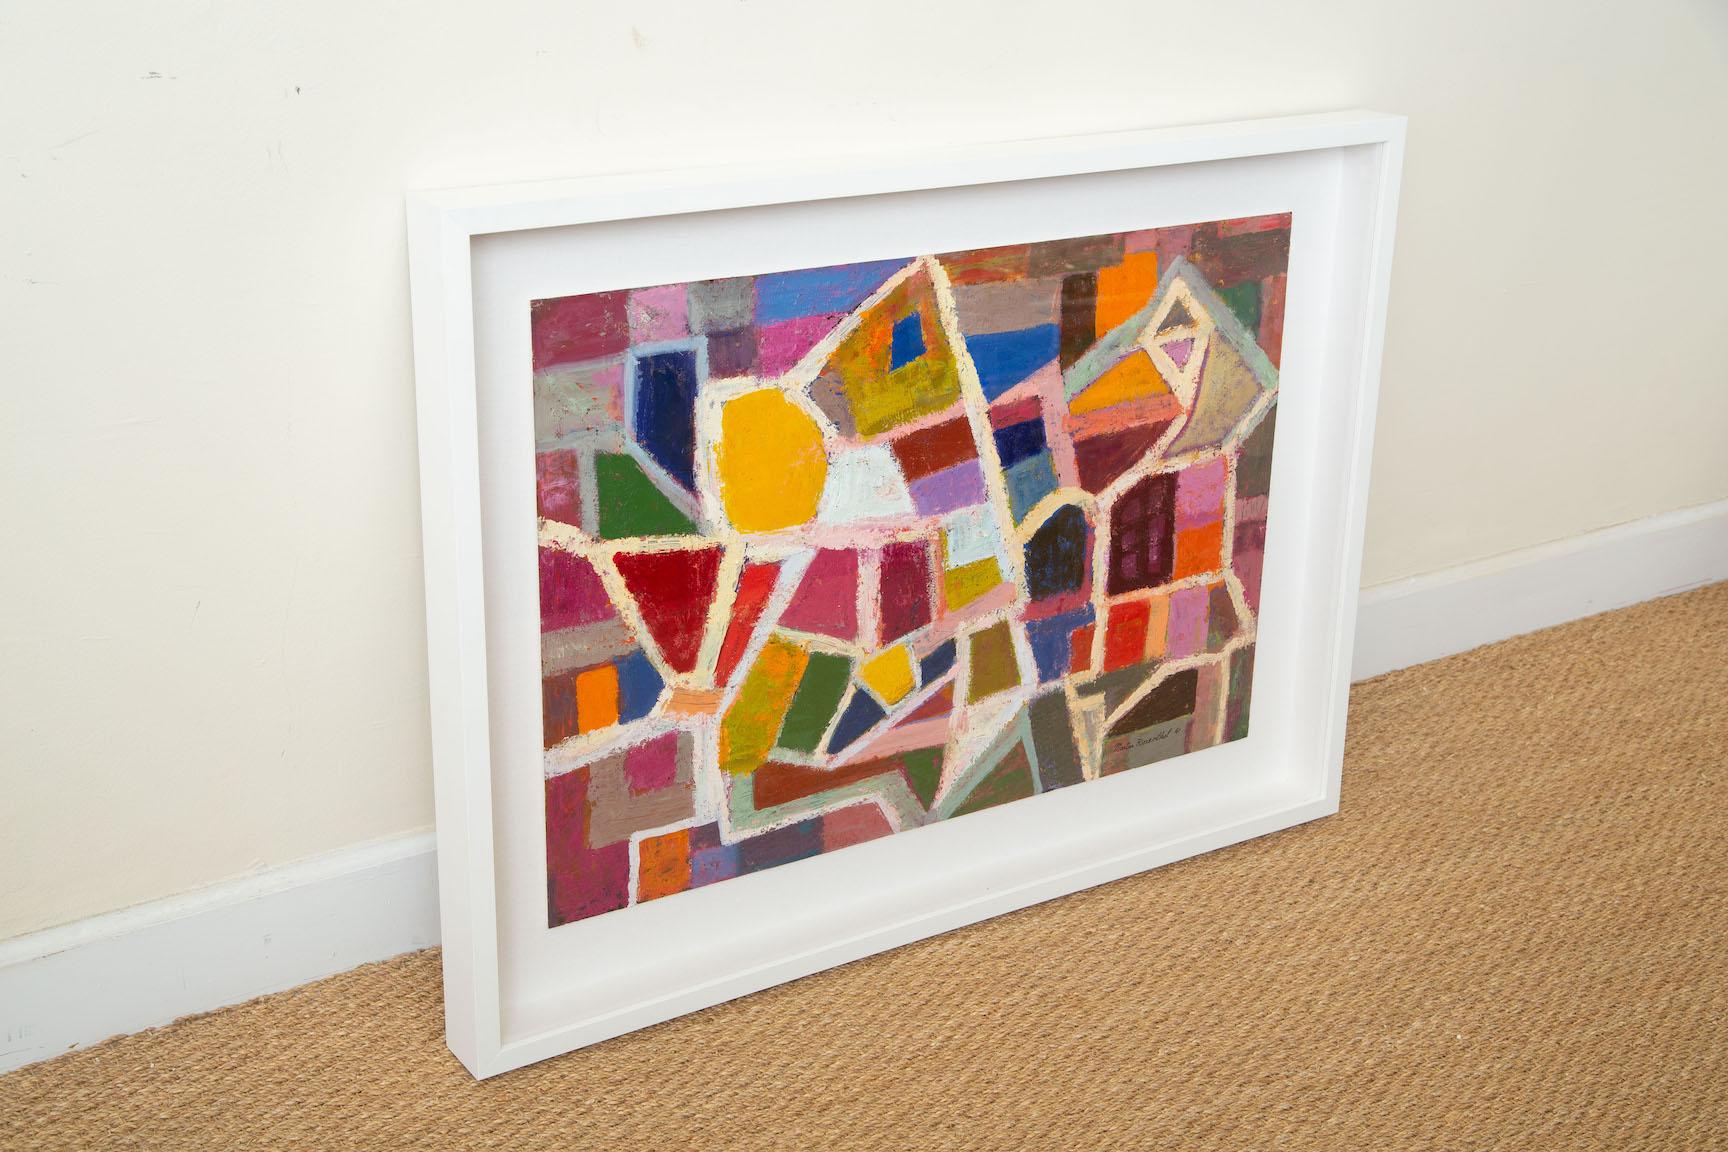 This wonderful, colorful original and one of a kind work of art is by Martin Rosenthal from the 60's. It is a horizontal oil on thick paper almost palette knife form. The new white wood custom frame adds to the now modernity of this happy art. It